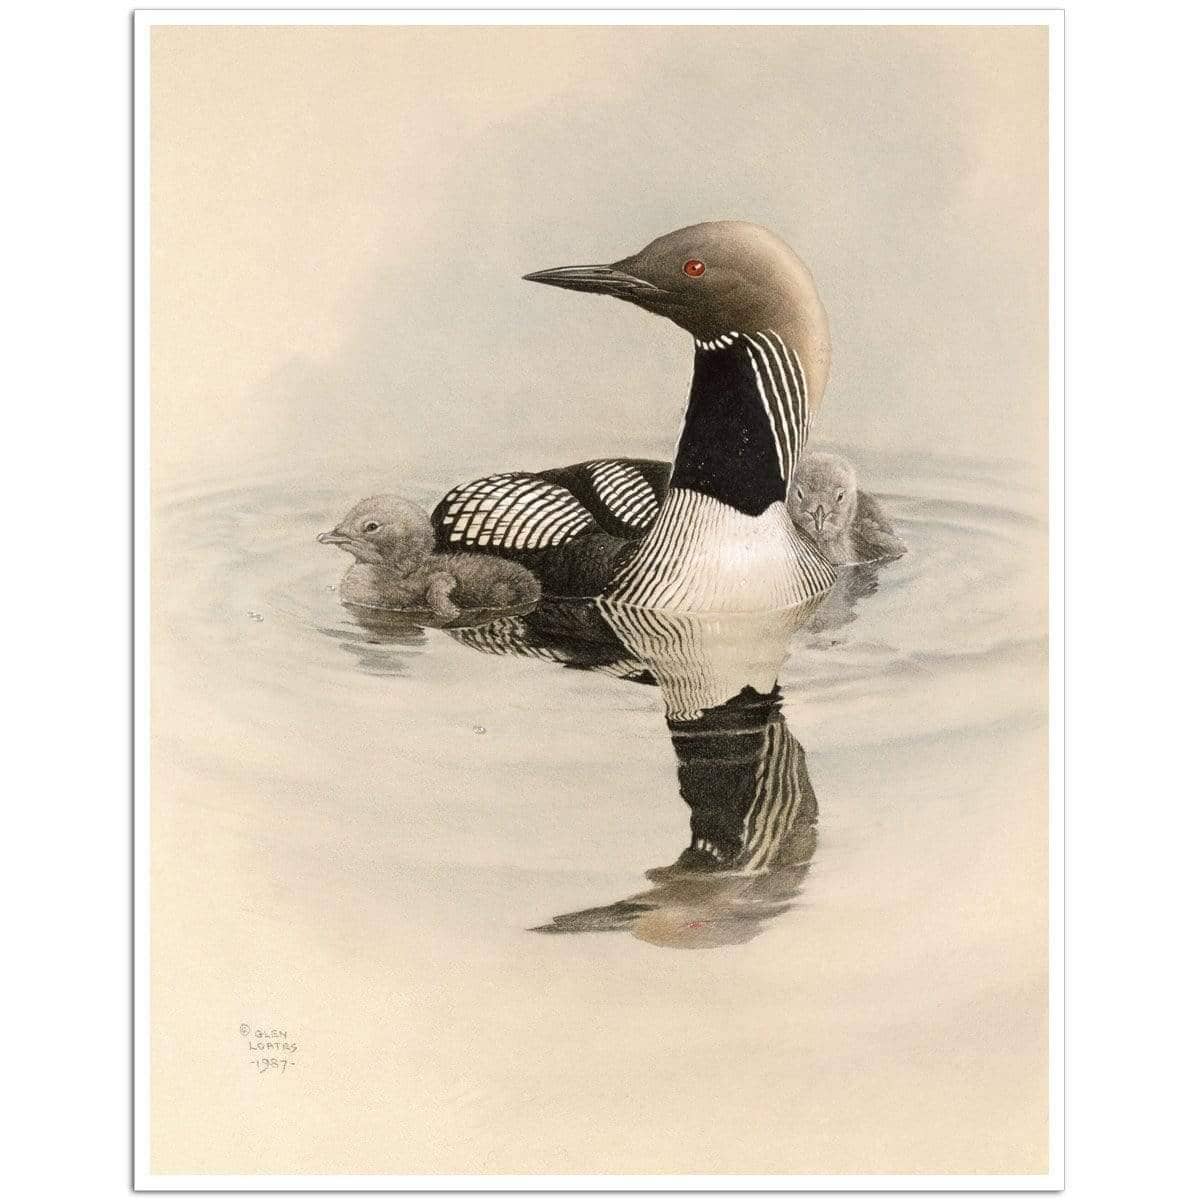 Arctic Loon With Young - Art Print | Artwork by Glen Loates